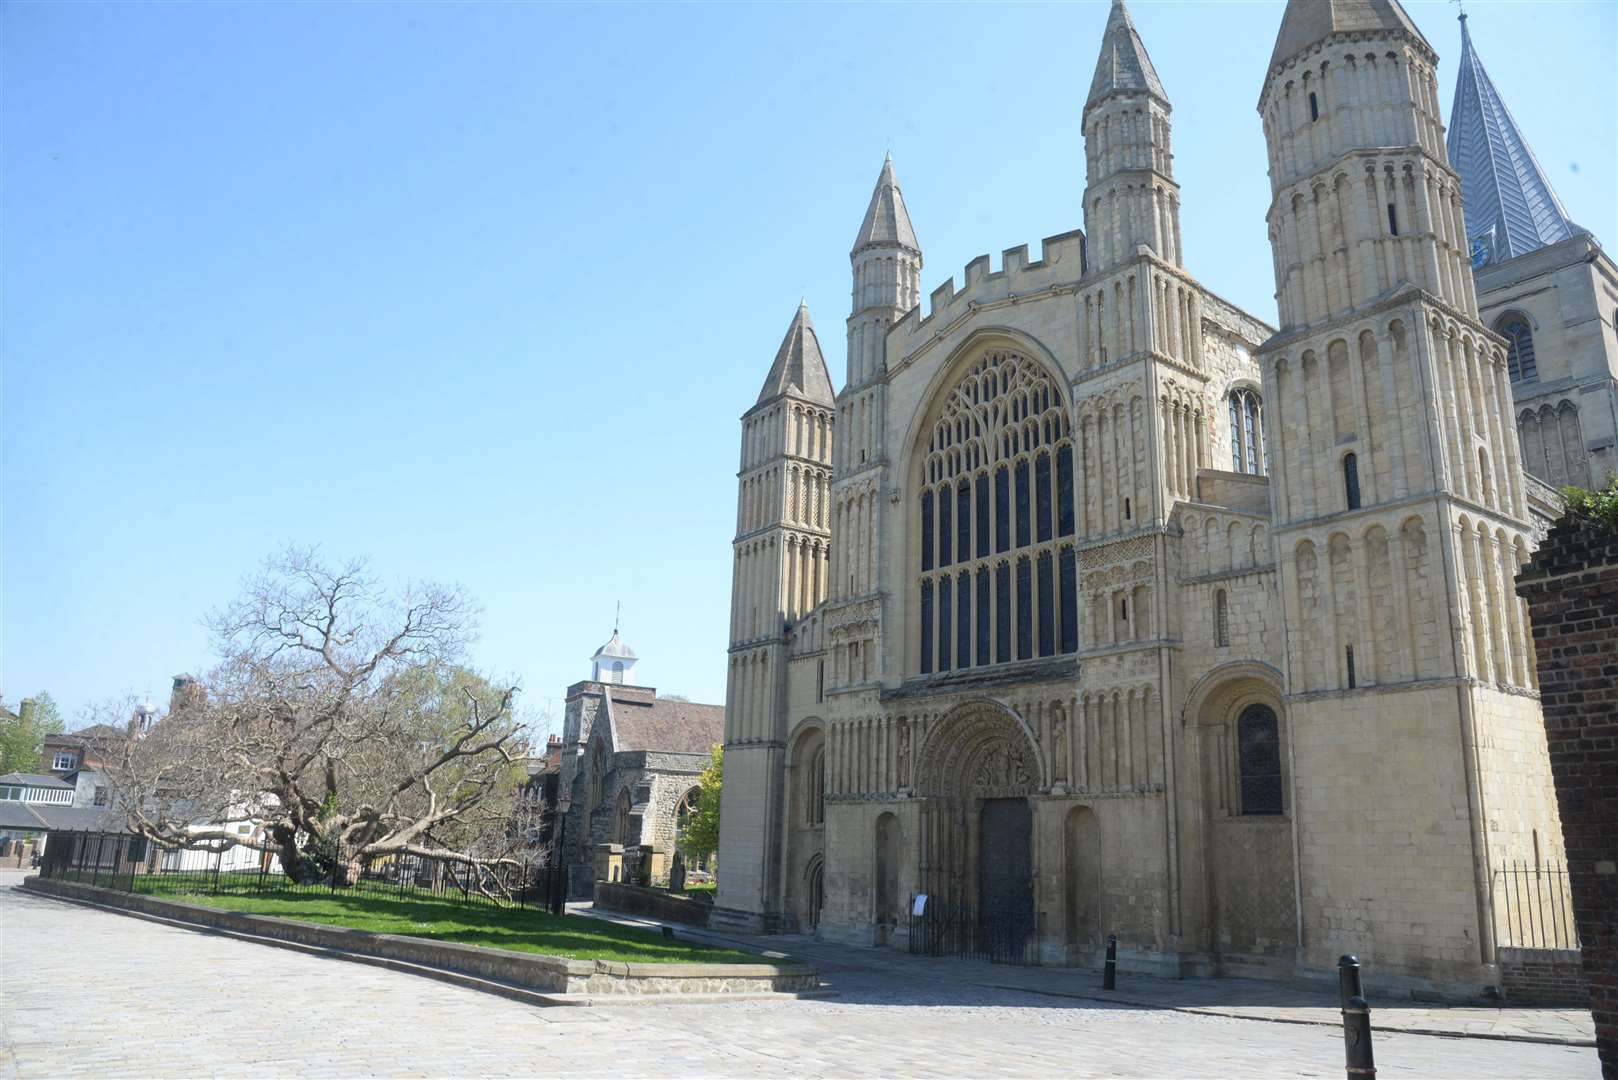 Rochester Cathedral will host the fourth testing site in Medway from Wednesday